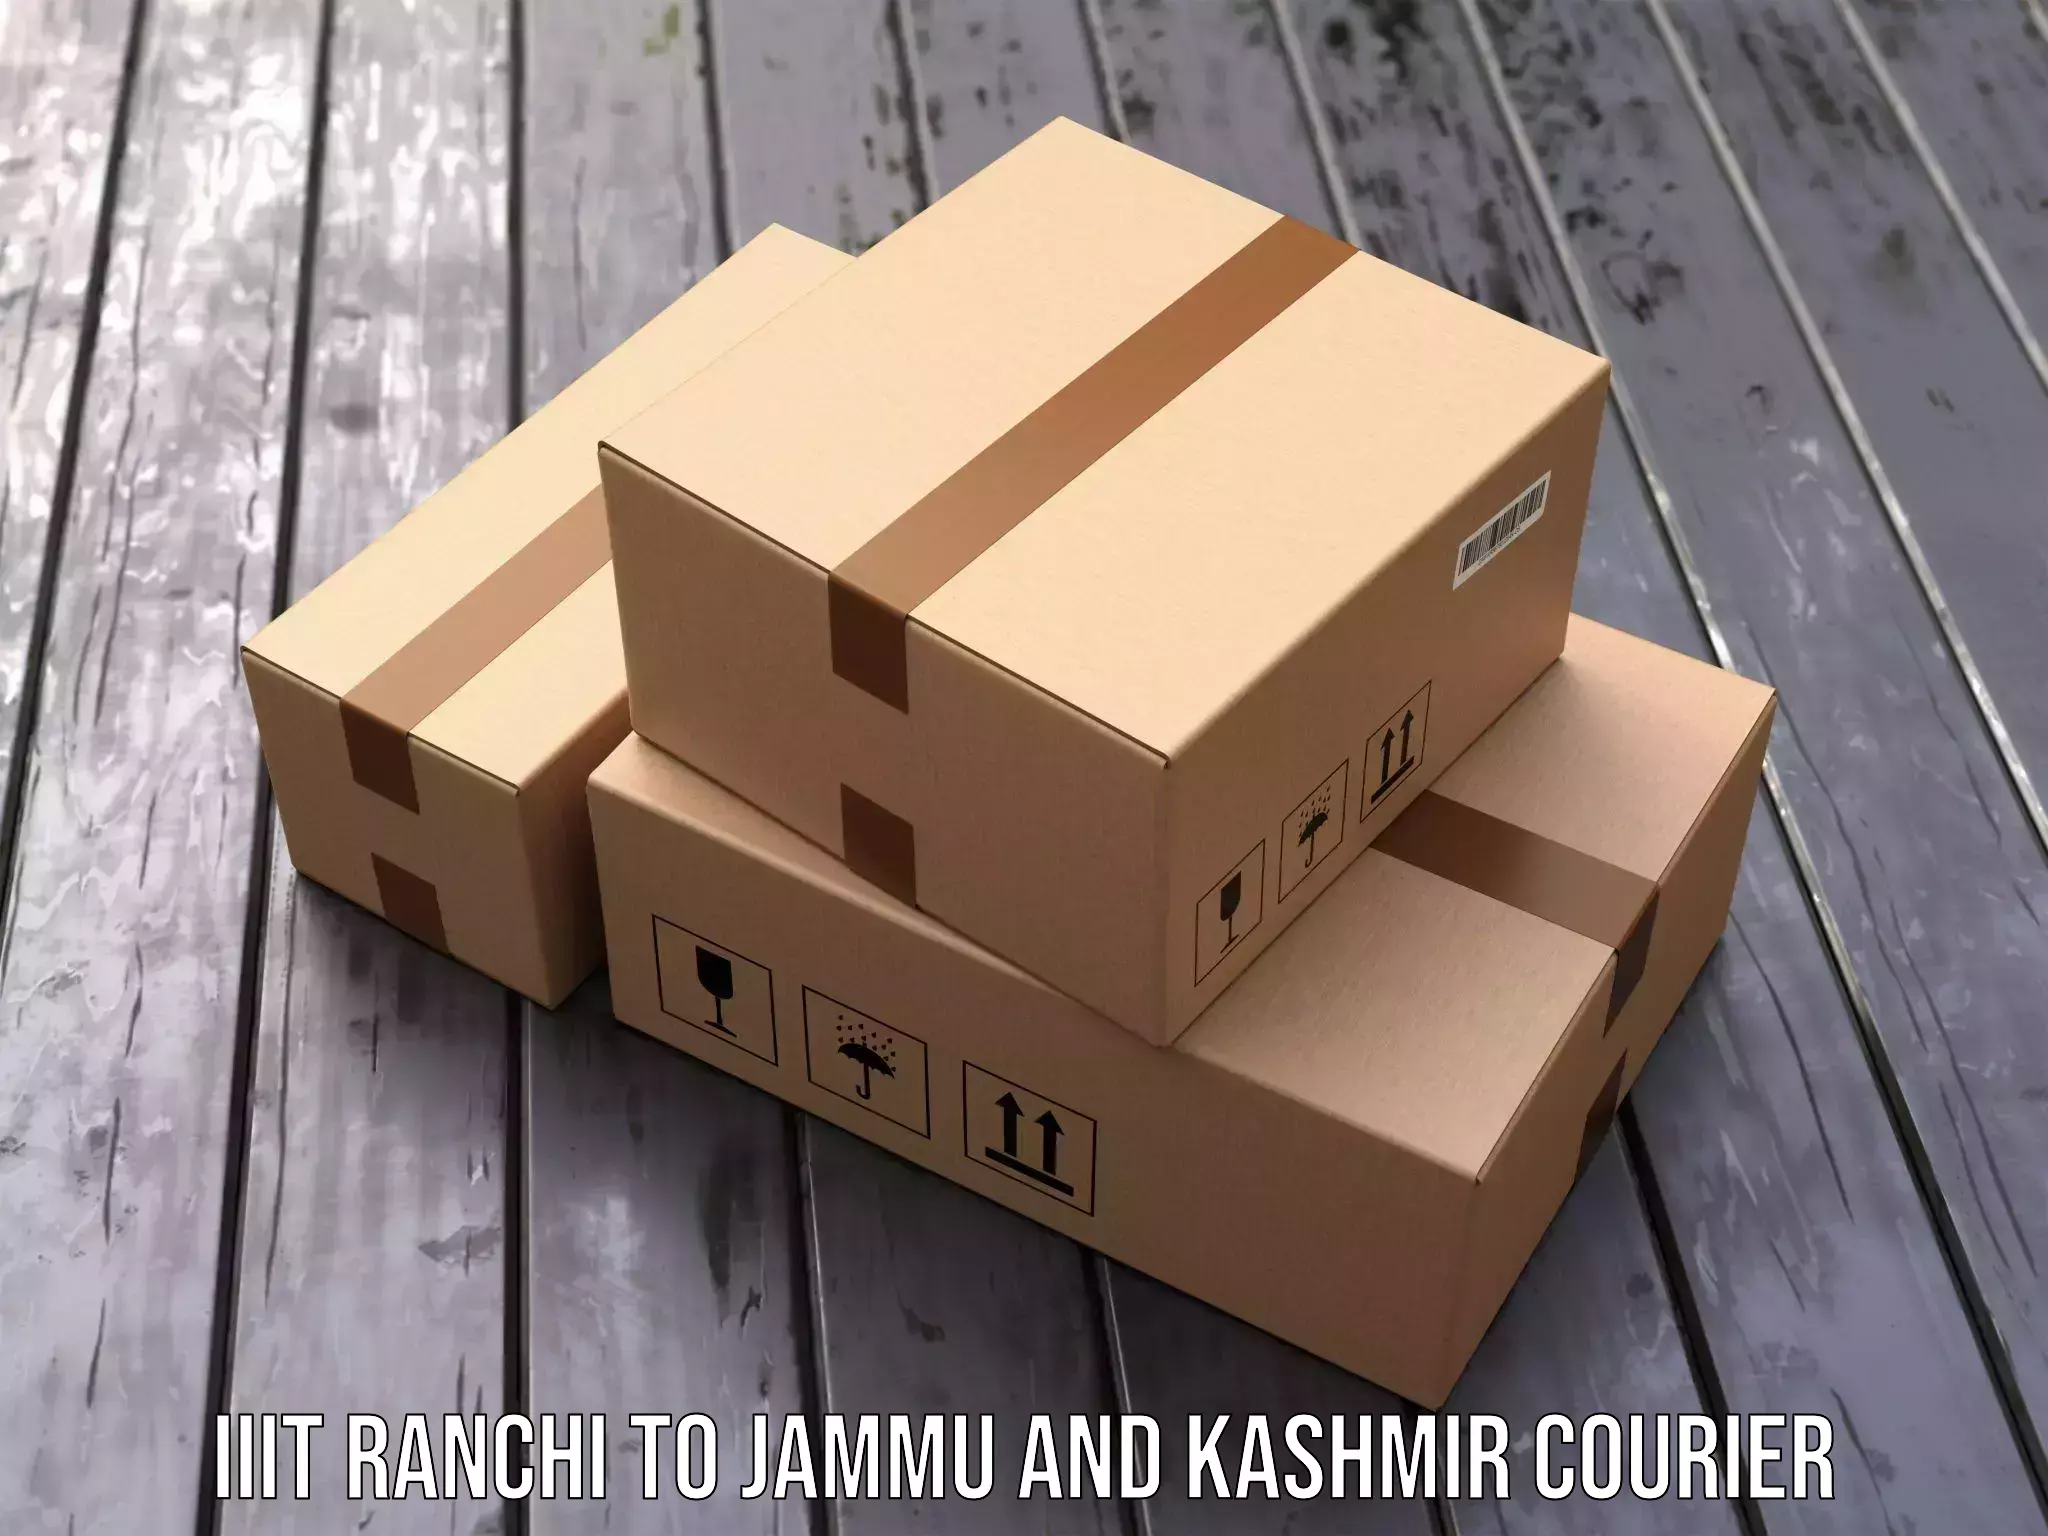 Next-day delivery options IIIT Ranchi to Pulwama